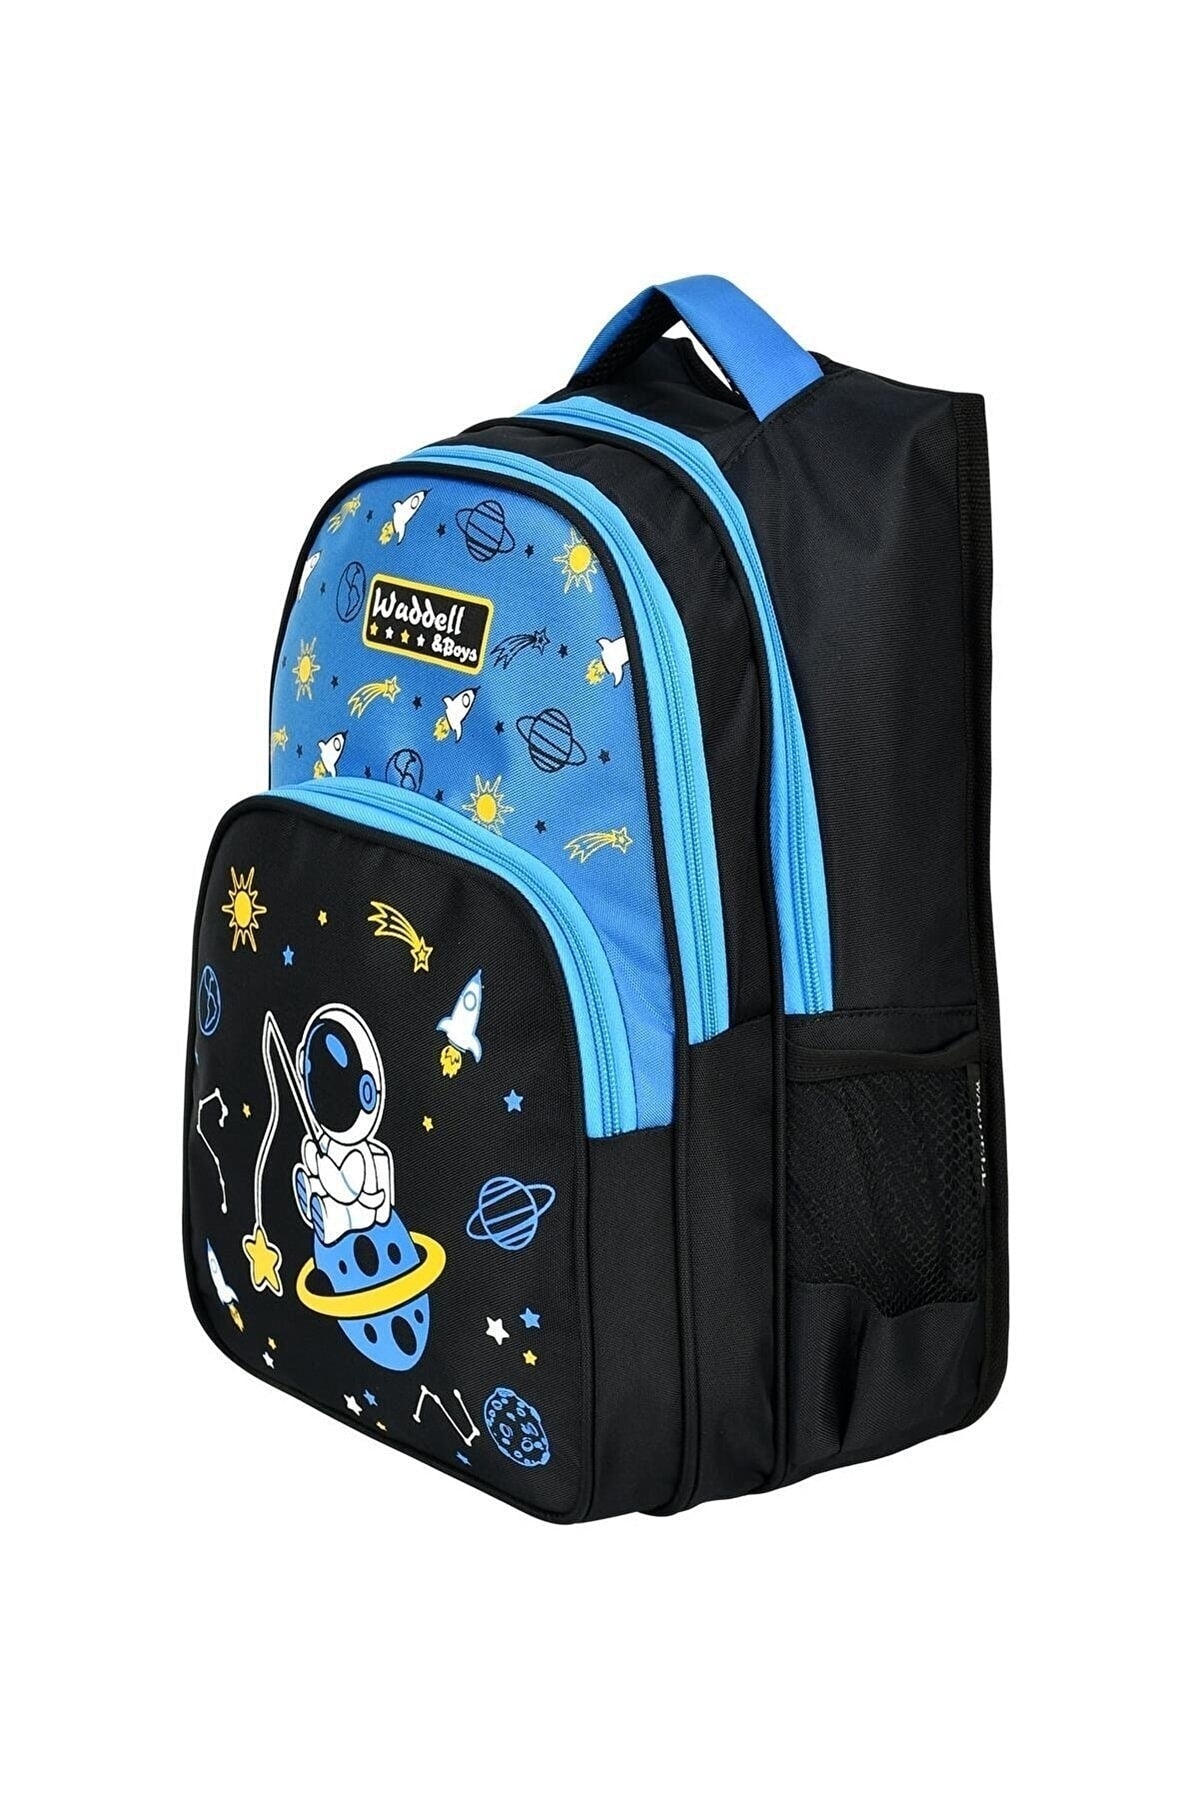 Licensed Astronaut Patterned Primary School Bag And Lunch Box